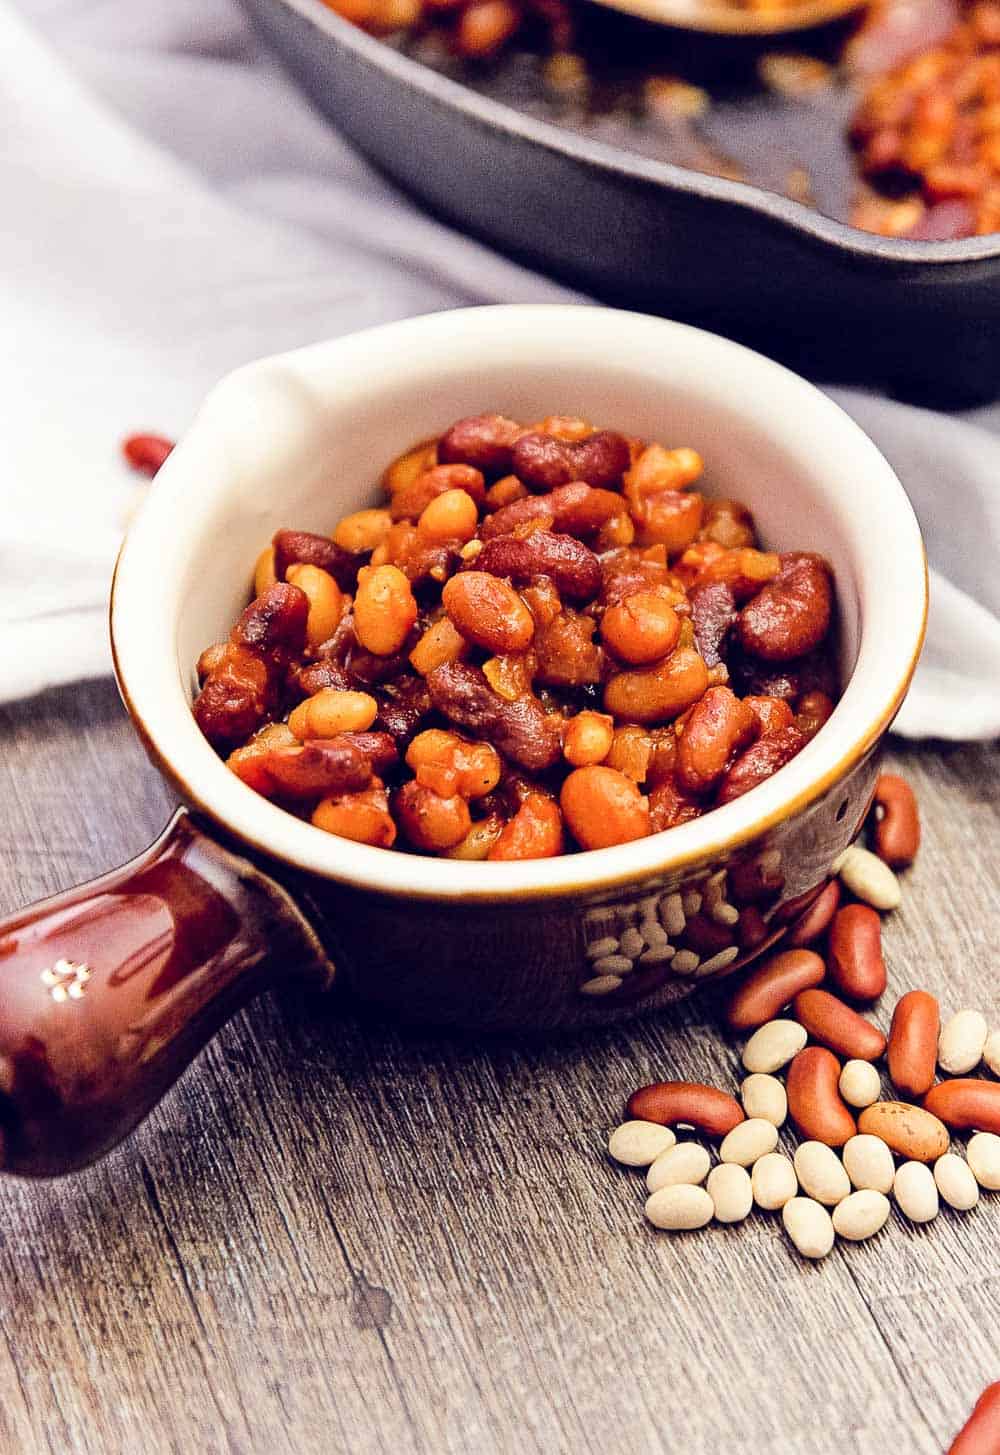 bbq baked beans, whole food plant based, side, beans, bbq, baked beans, gluten free, oil free, refined sugar free, healthy, vegan, vegetarian